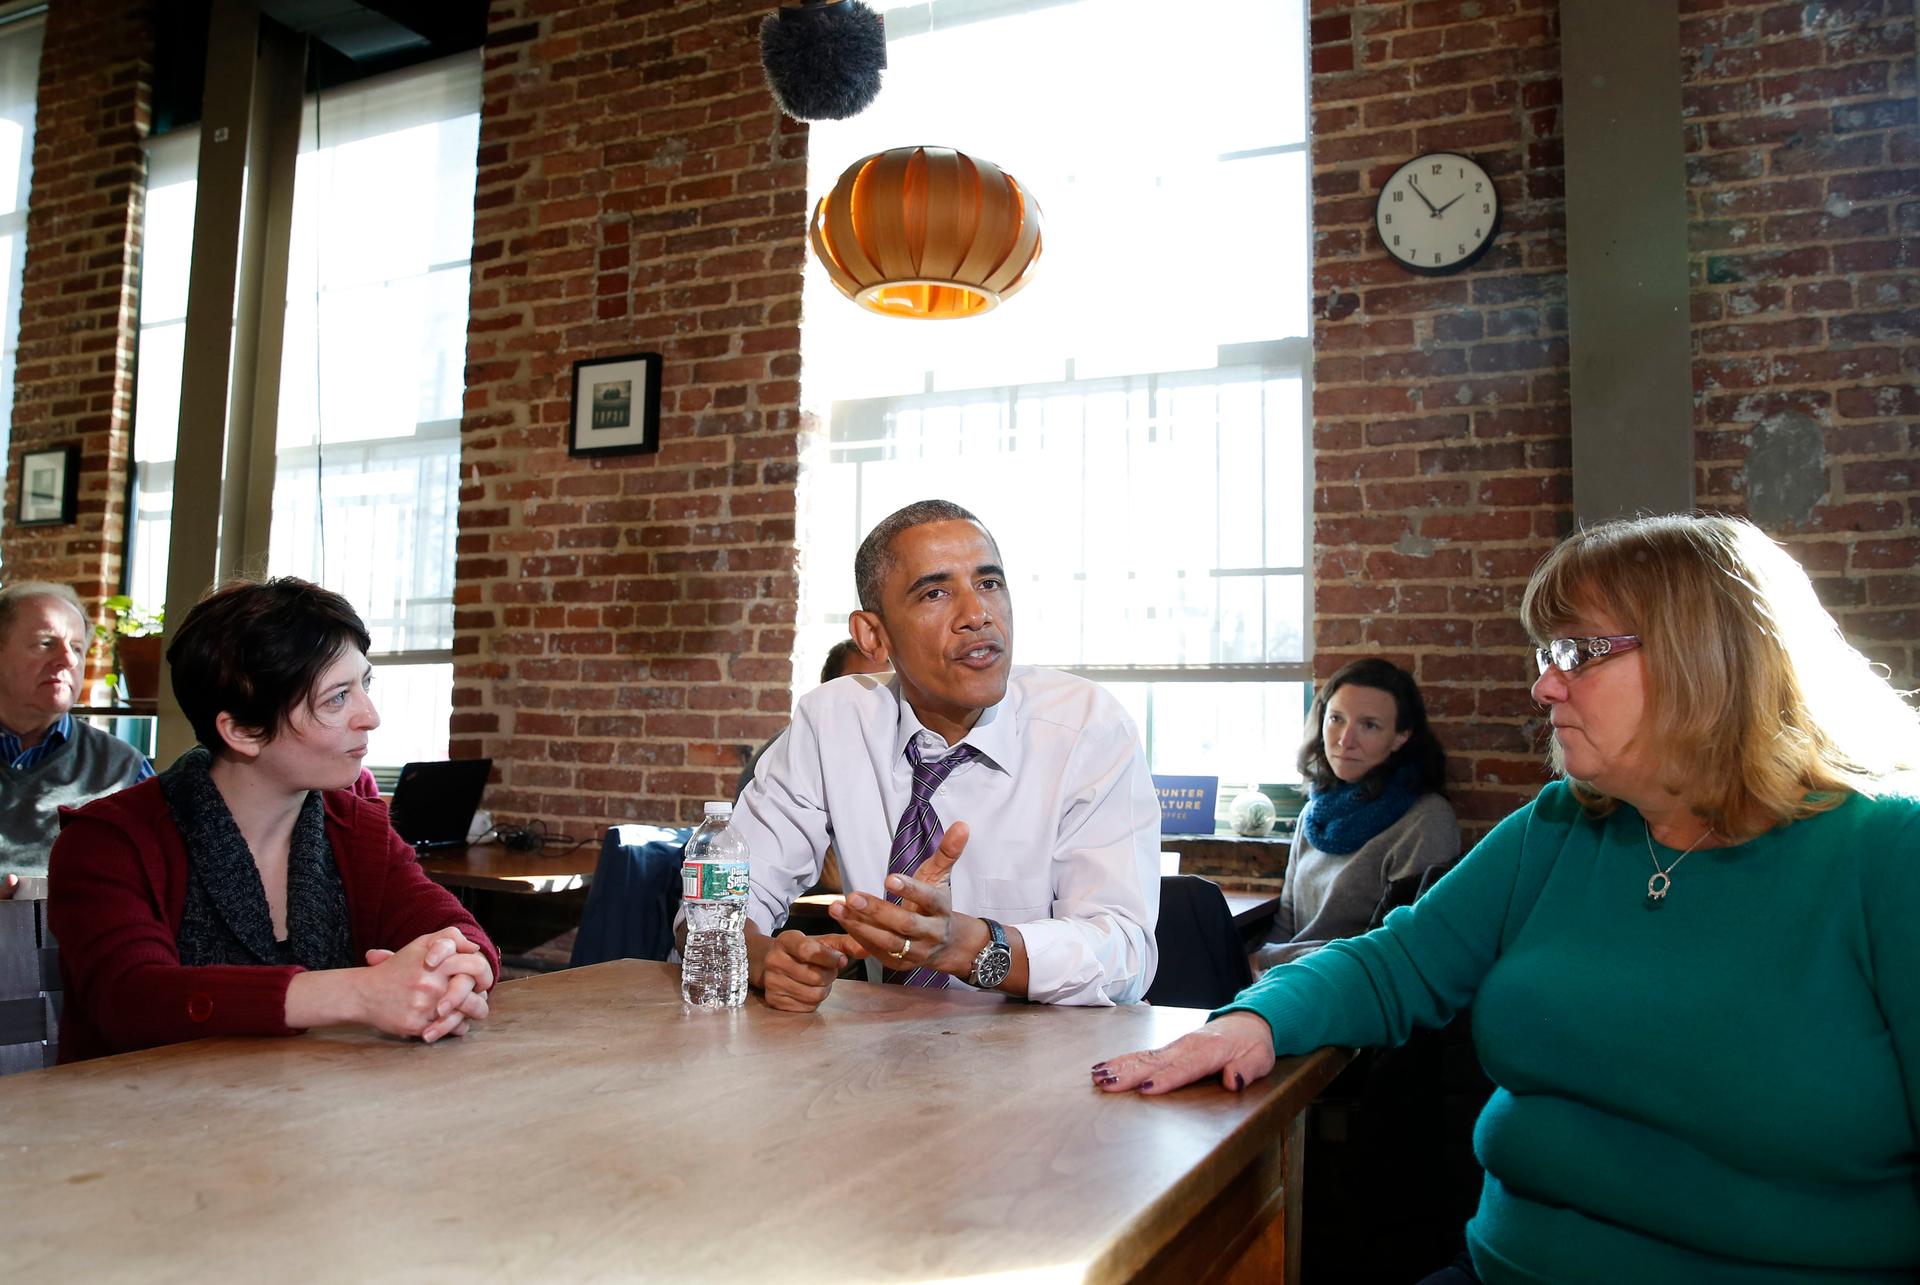 President Barack Obama talks about legislation to offer paid sick leave for Americans while at Charmington's Cafe in Baltimore, Maryland, on January 15, 2015.